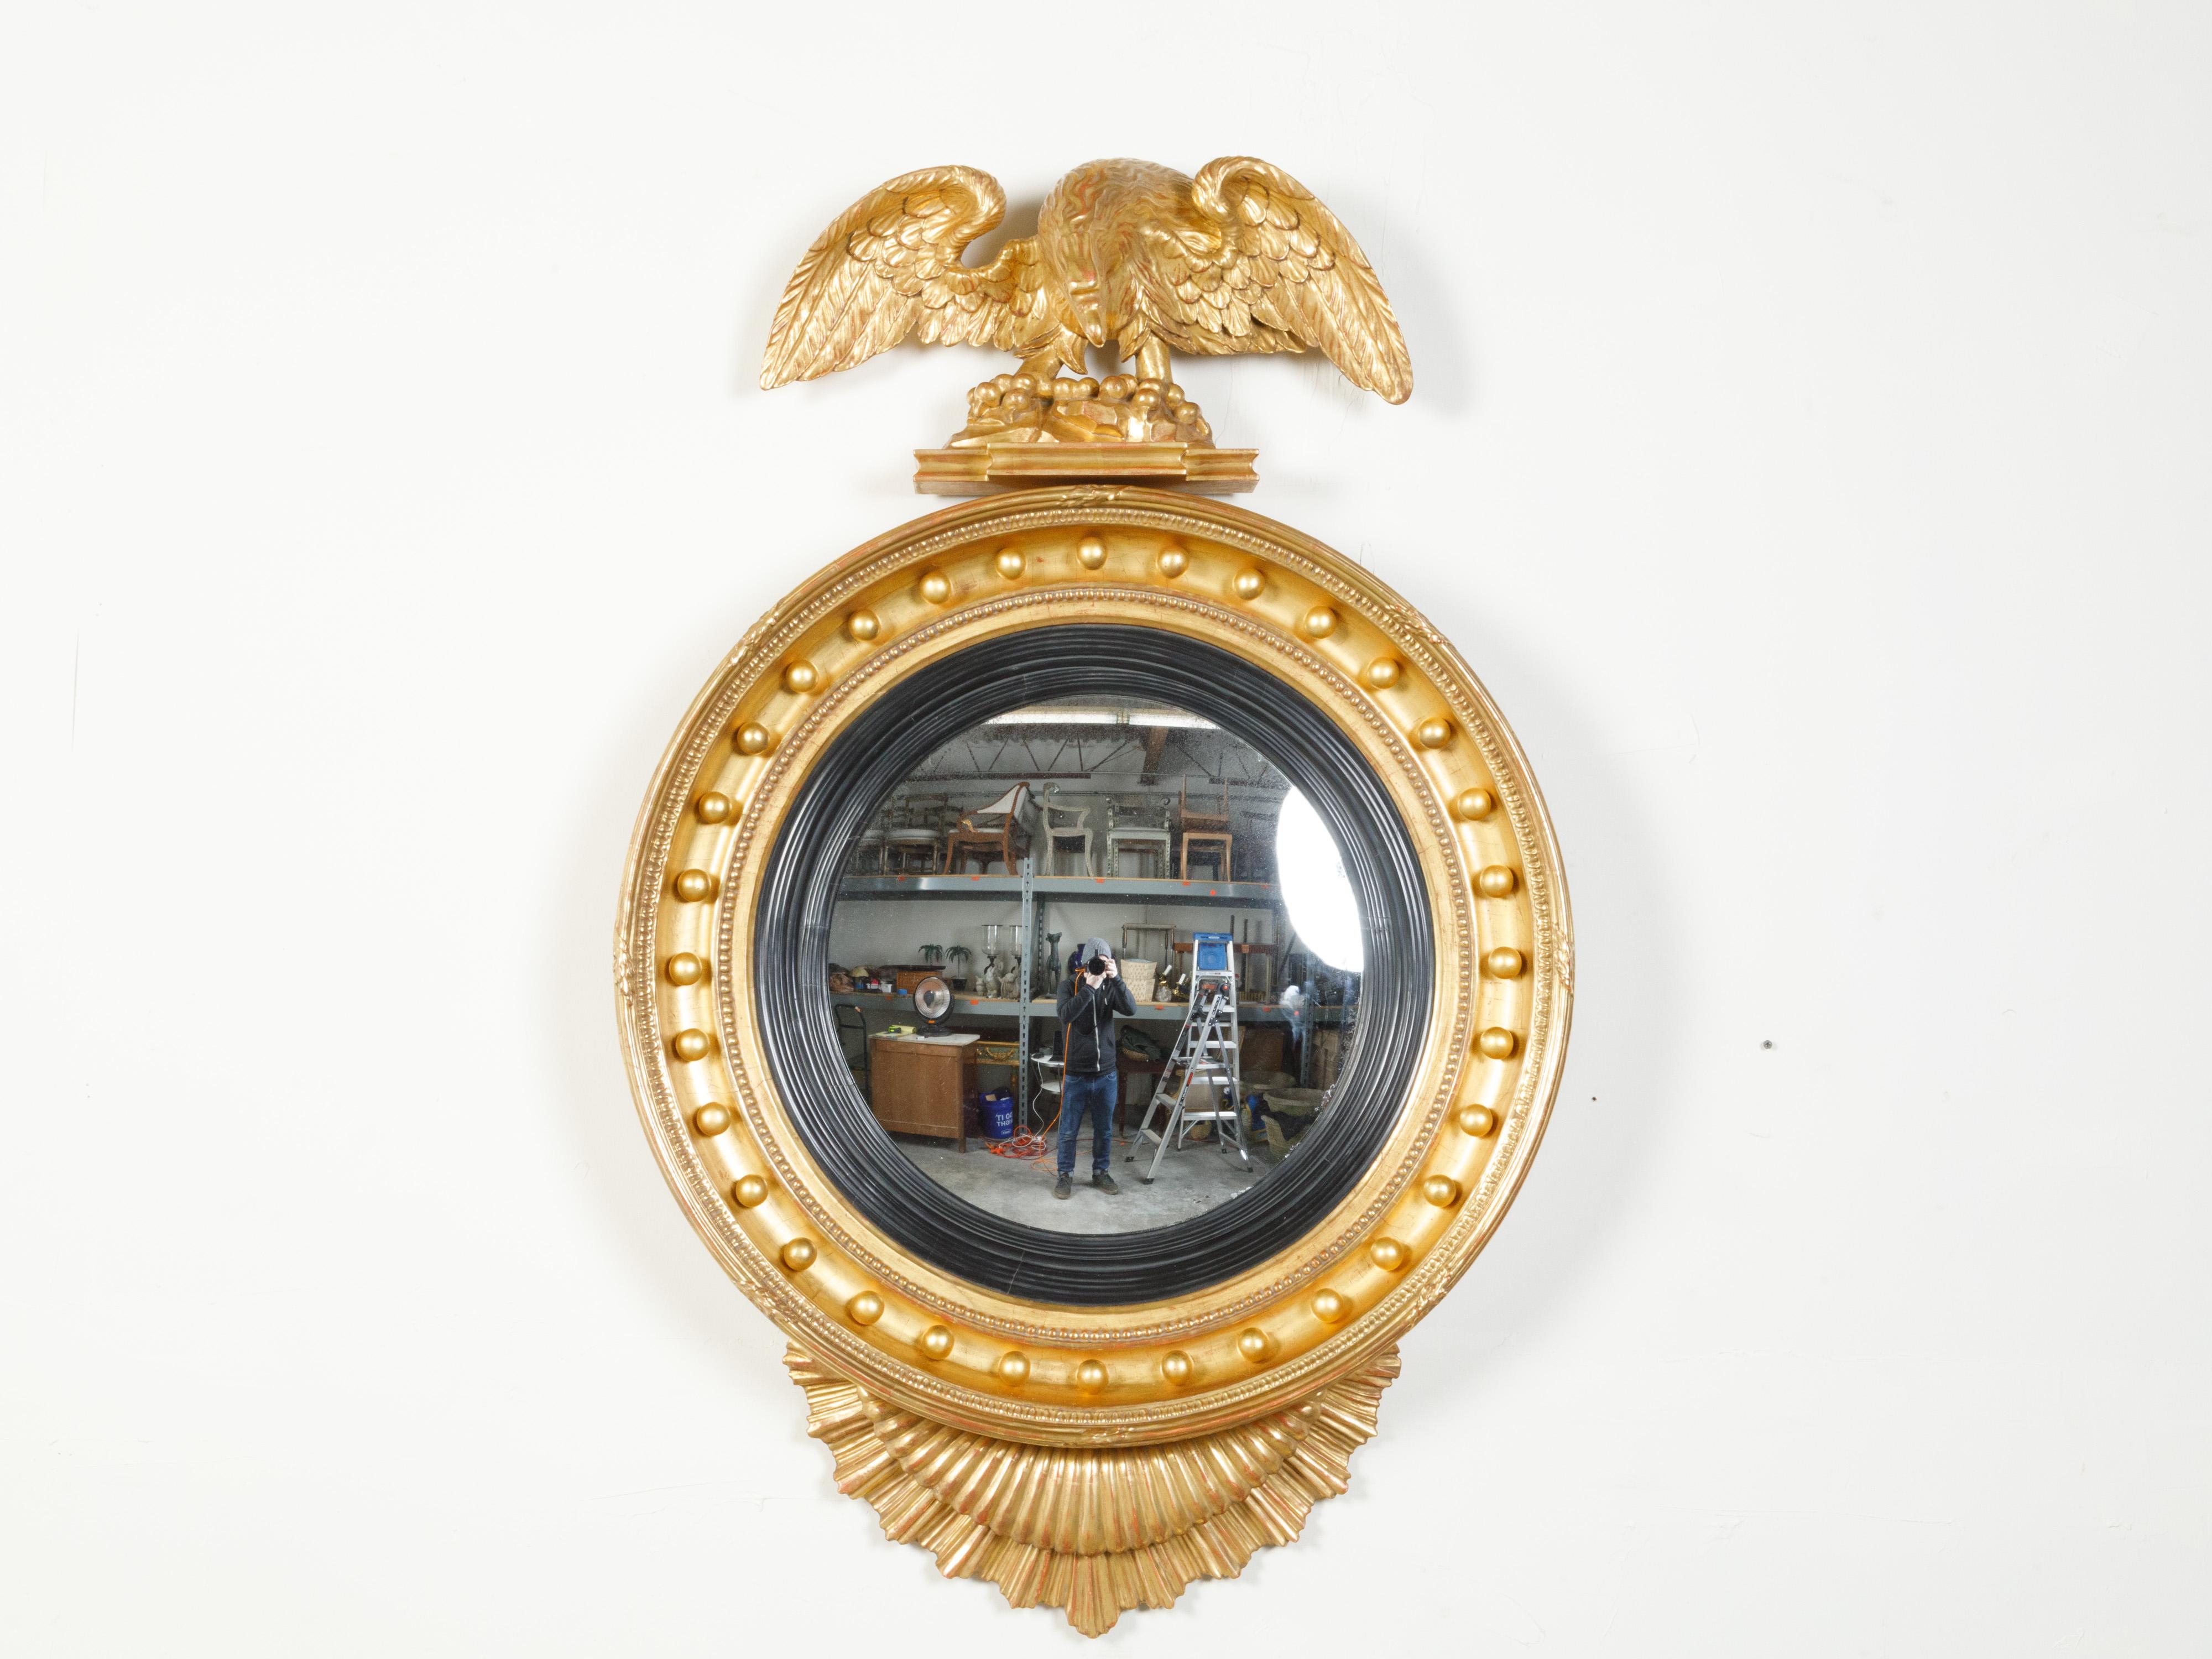 An English giltwood convex girandole bullseye mirror from the 19th century, with carved eagle motif. Created in England during the 19th century, this giltwood girandole mirror attracts our attention with its eagle marking the upper section. His